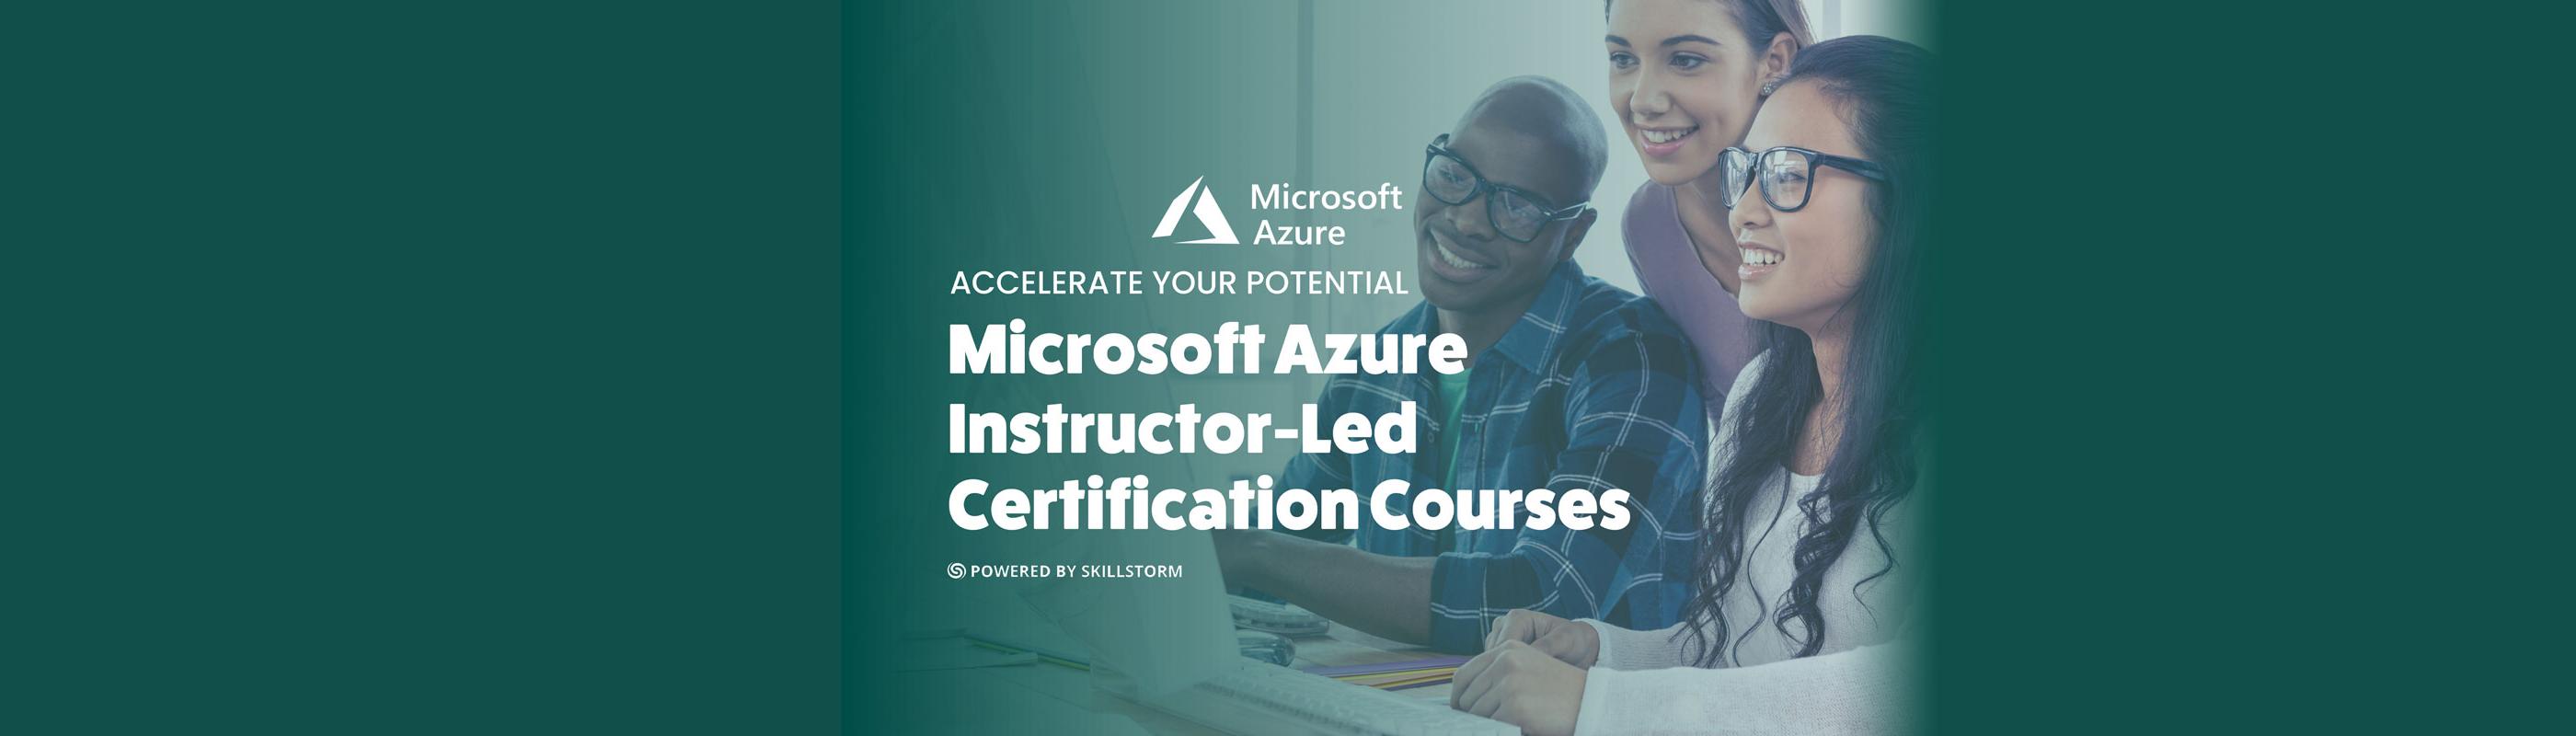 Microsoft Azure Instructor-Led Certification Courses powered by SkillStorm